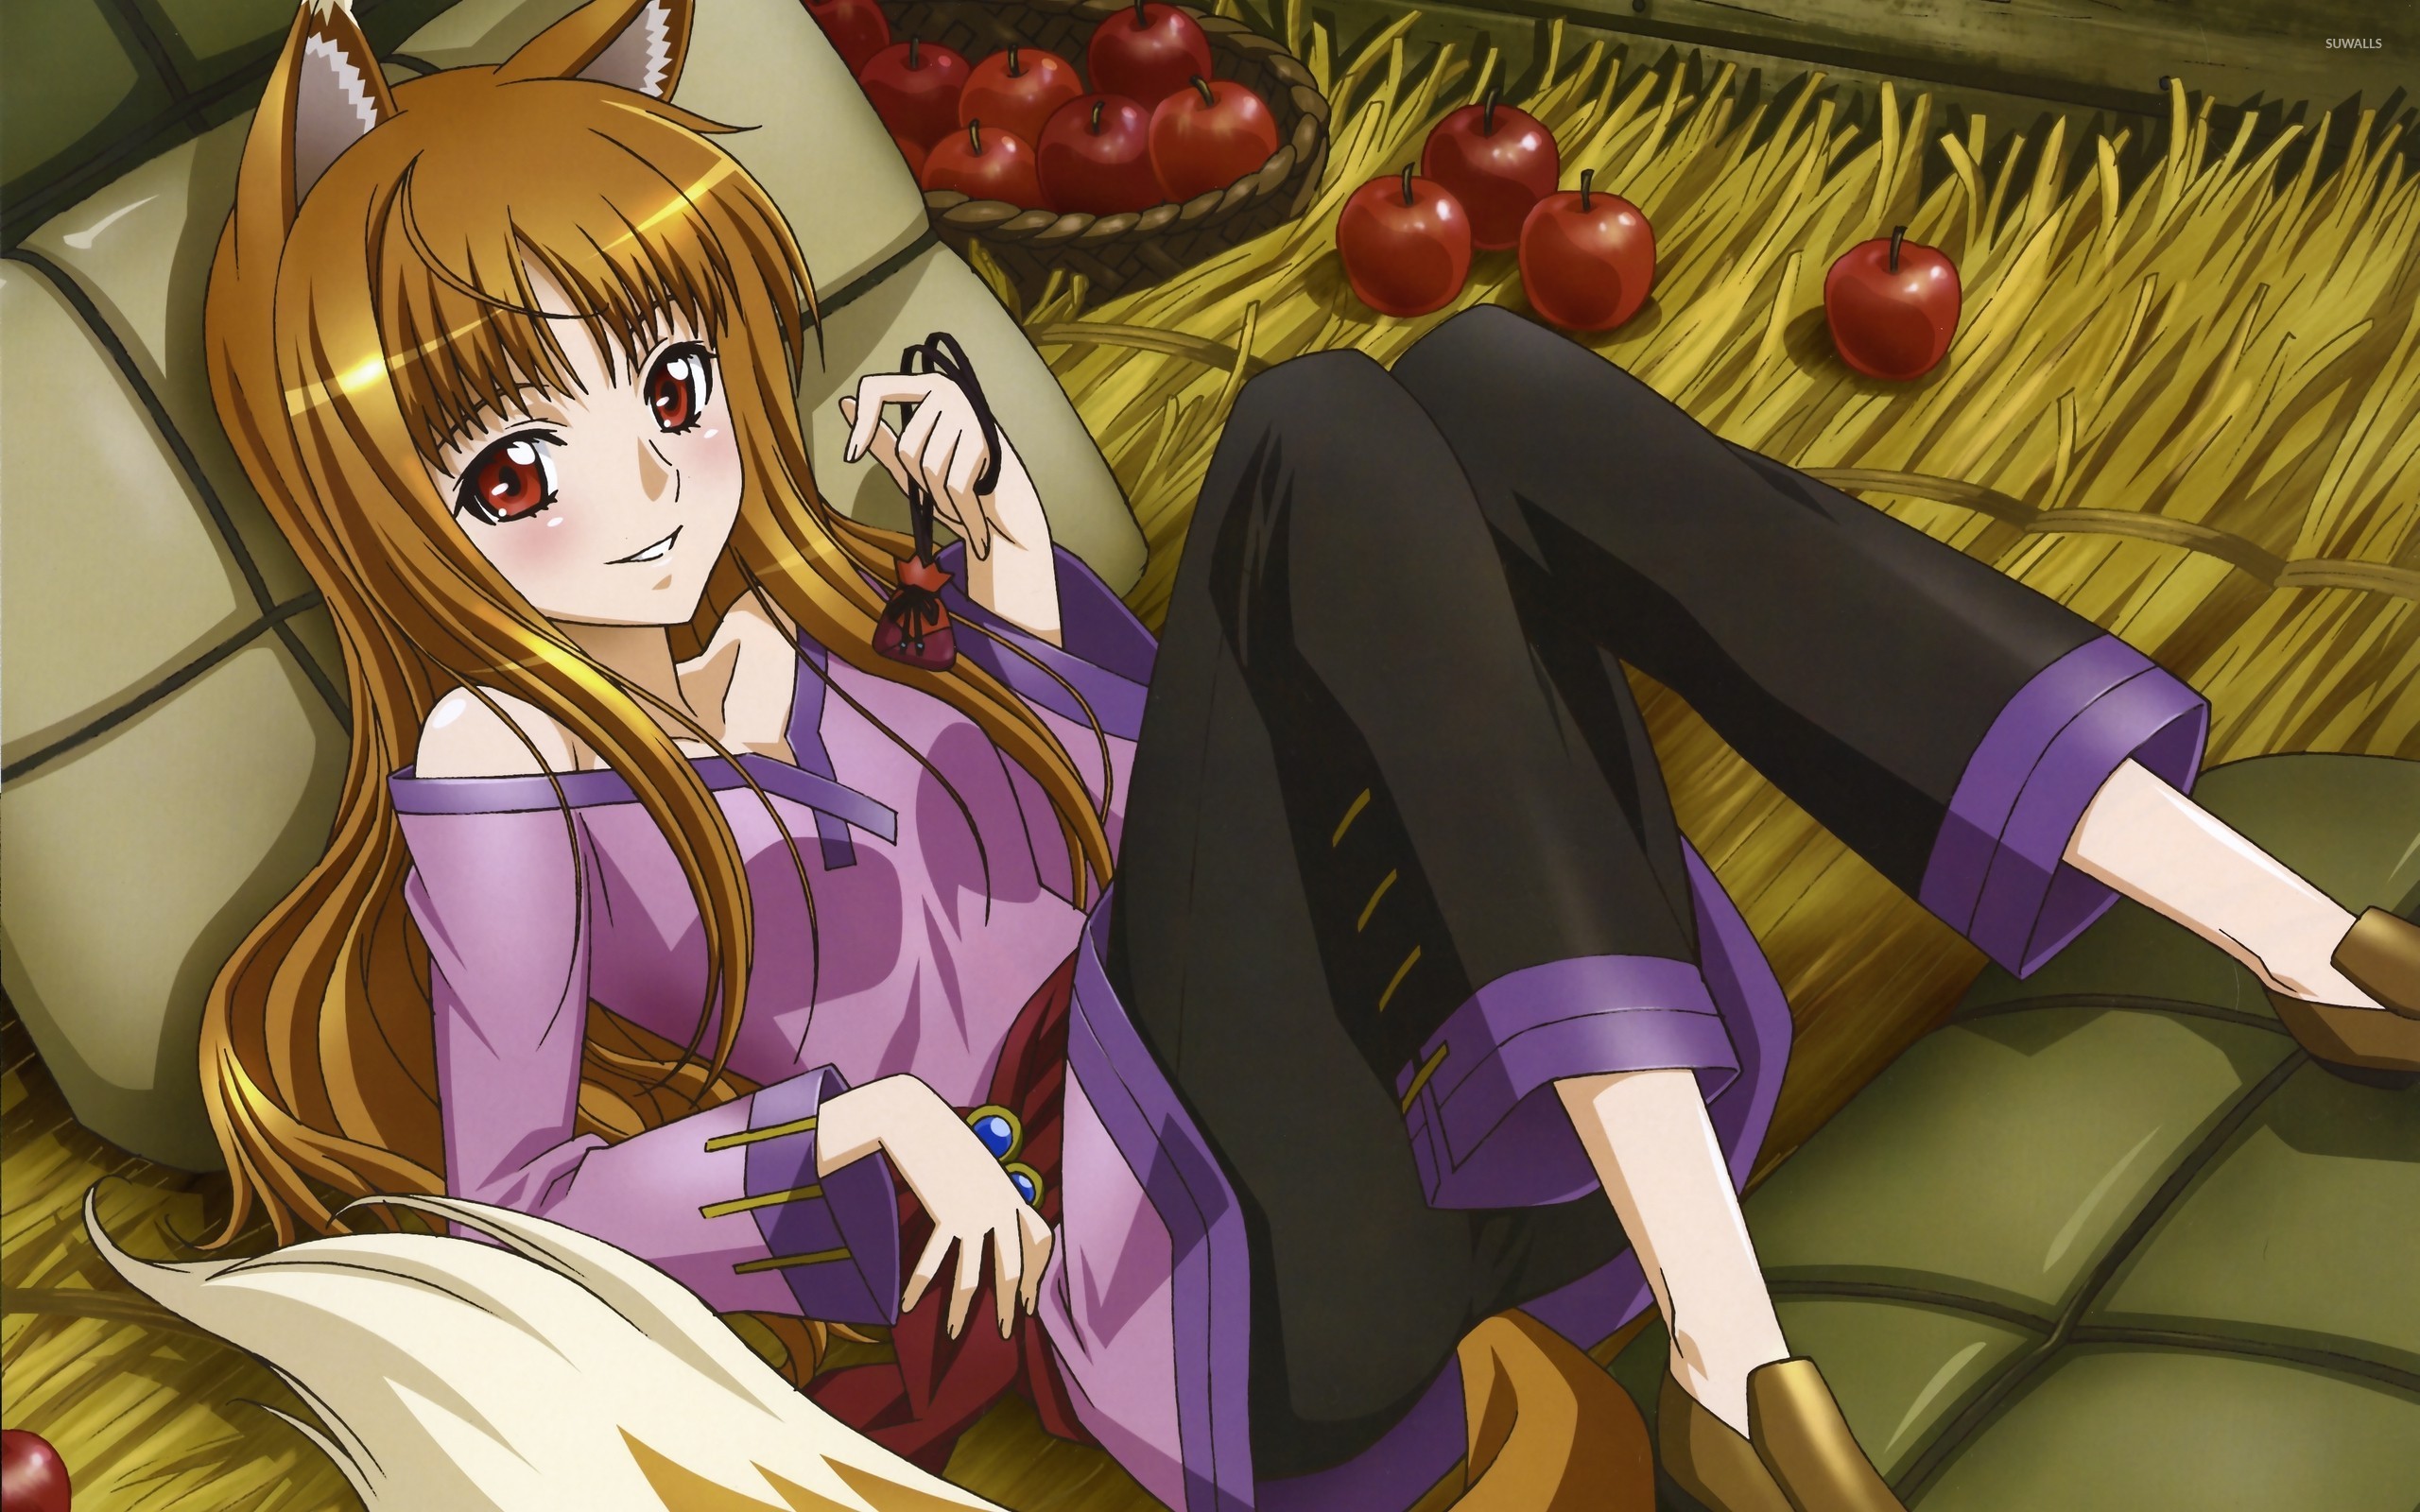 holo-in-spice-and-wolf-49555-2560x1600.jpg